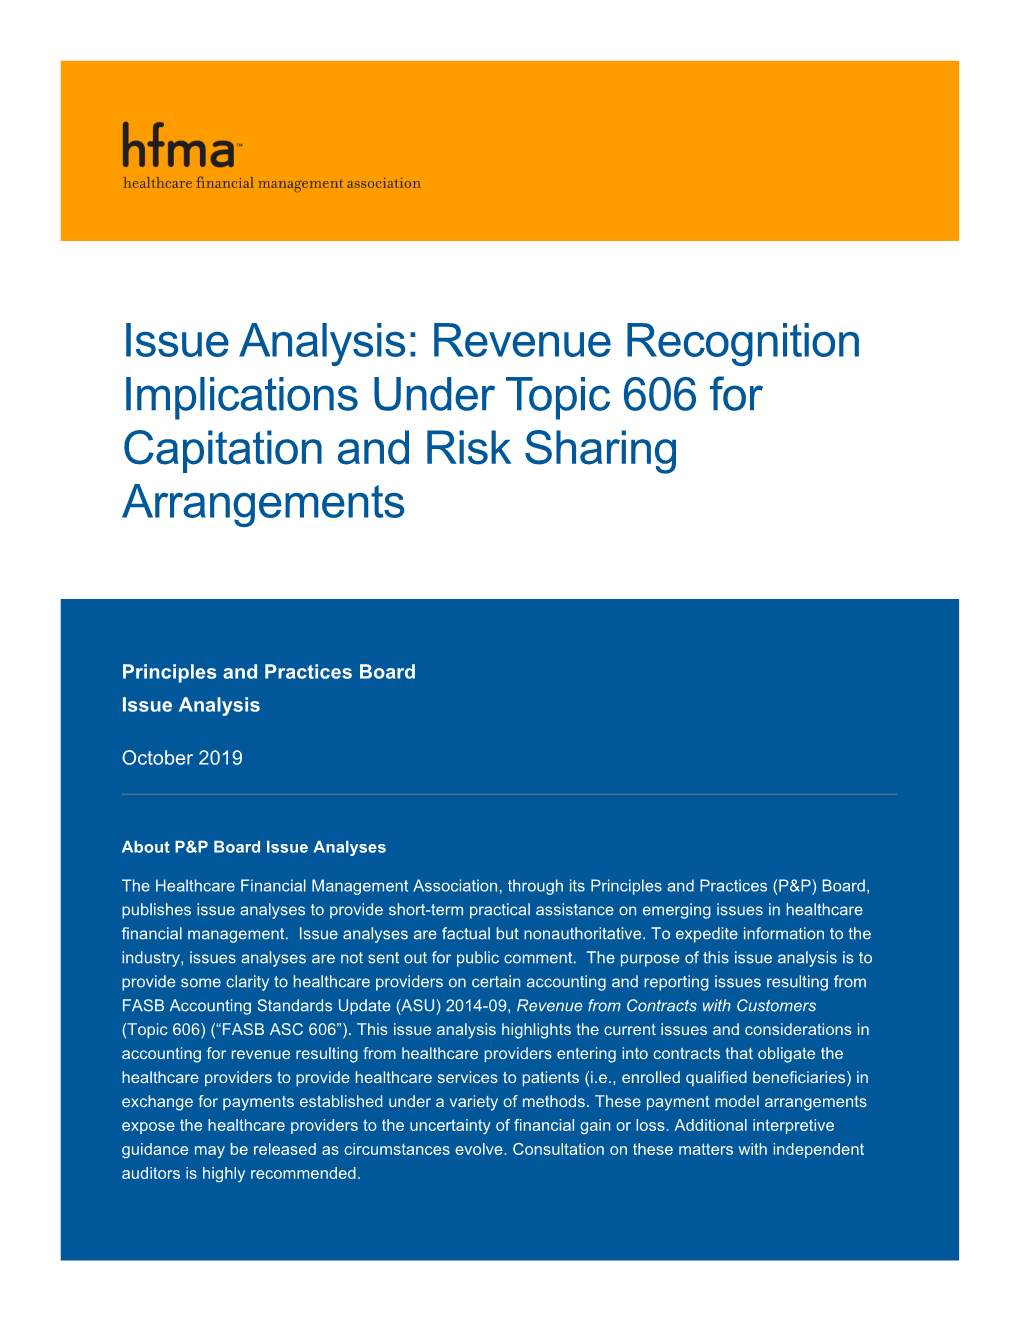 Revenue Recognition Implications Under Topic 606 for Capitation and Risk Sharing Arrangements